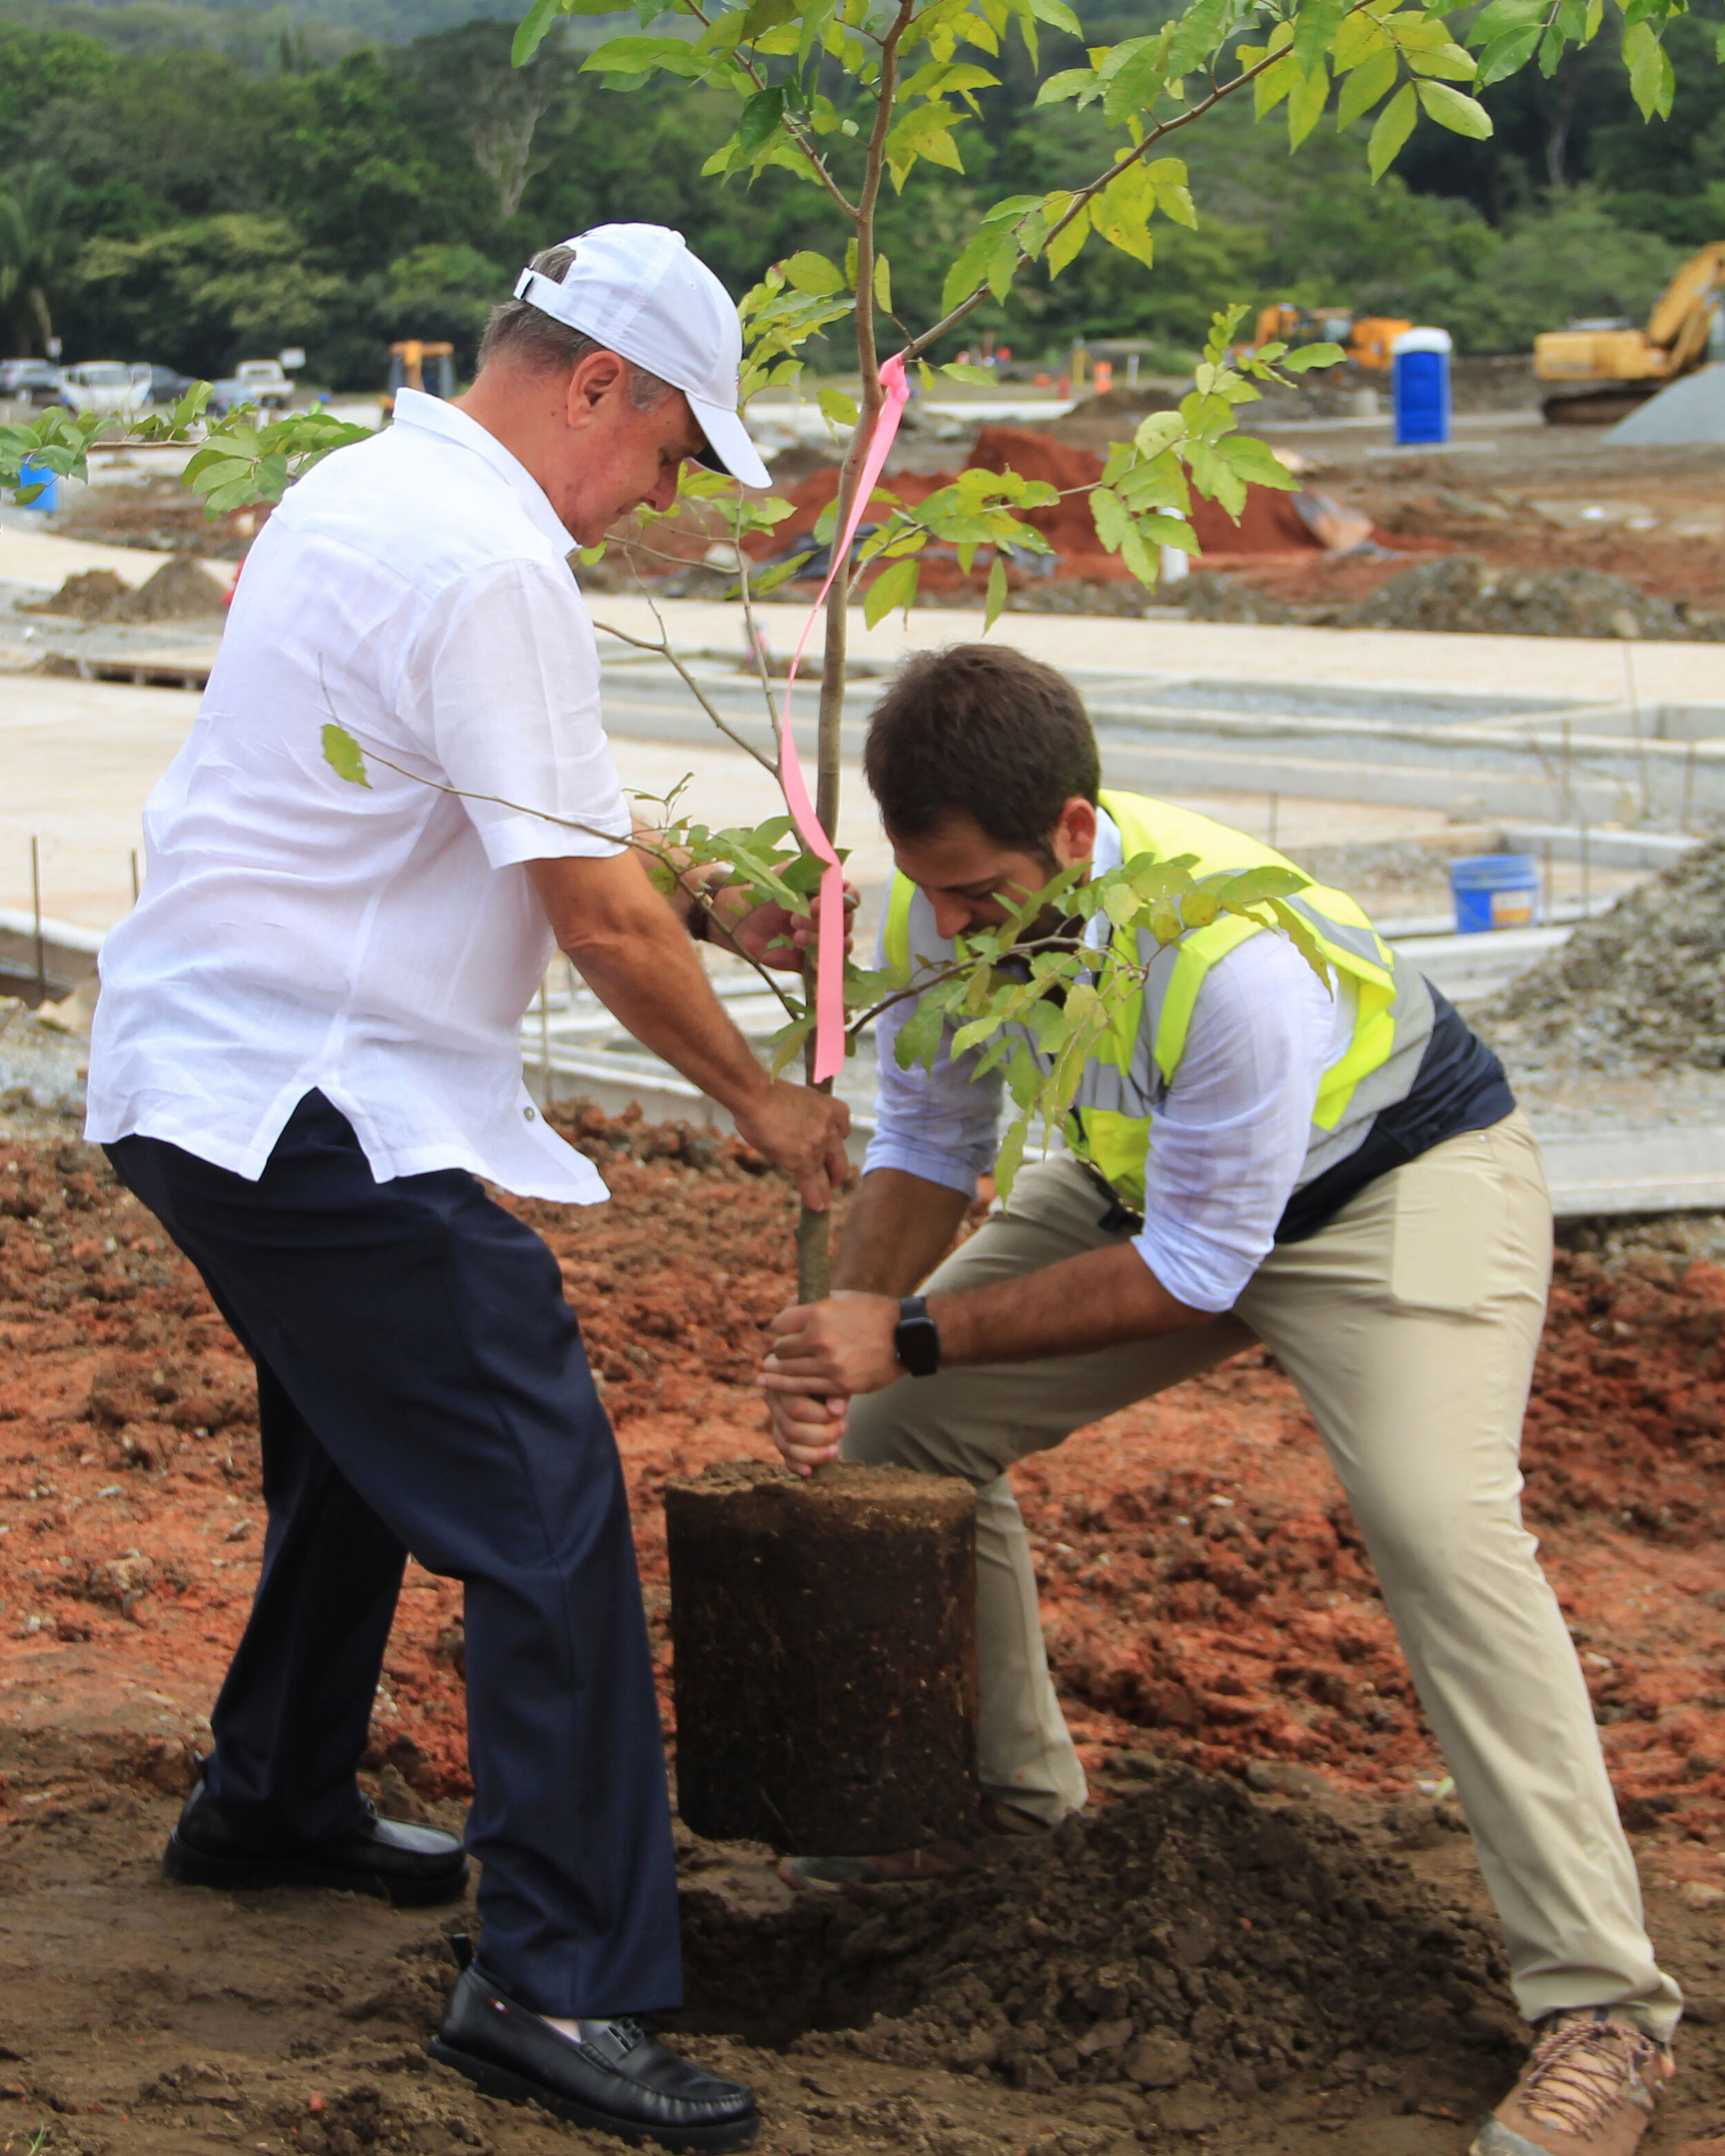 Henry Faarup Mauad and Henry Faarup Humbert planting the Belisario Porras tree.